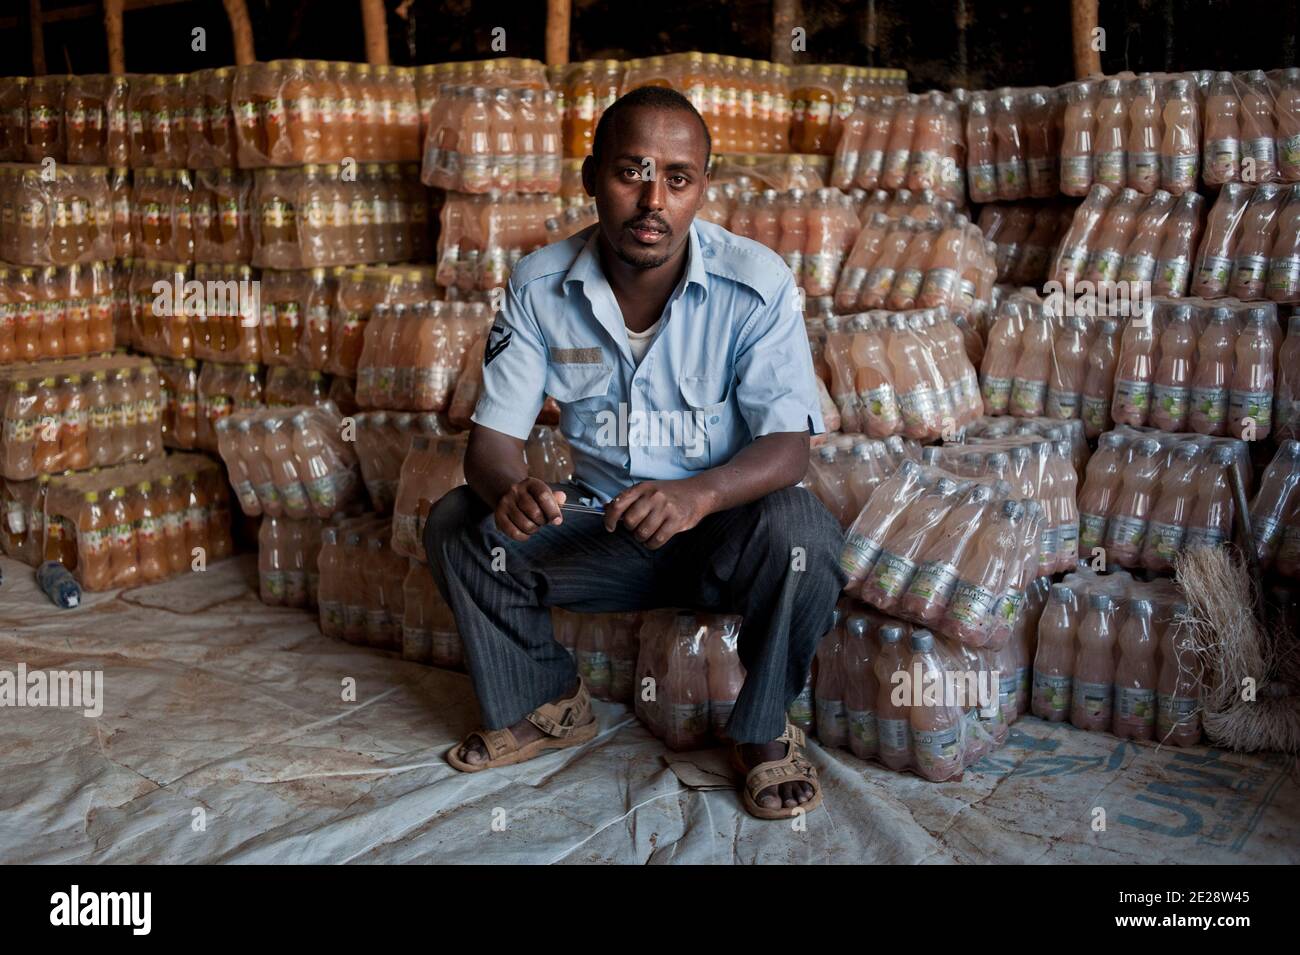 Abdi Mahat, 26 years old, from Kismayo, pictured at the Dadaab refugee camp in Kenya, on August 15, 2011. He came here in 1991. Abdi is a salesman. Paradoxically, nobody has been buying any drink since the beginning of the draught. Business is being worse everyday. Abdi belongs to the first generation of refugee who fled the 1991 Civil War in Somalia. He remembers how empty the area was, back in the days.There was nobody there. The forest was close, people were scared of wild animals such as hyenas. They were afraid of robbers as well. To him, they used to live more precariously than this new Stock Photo